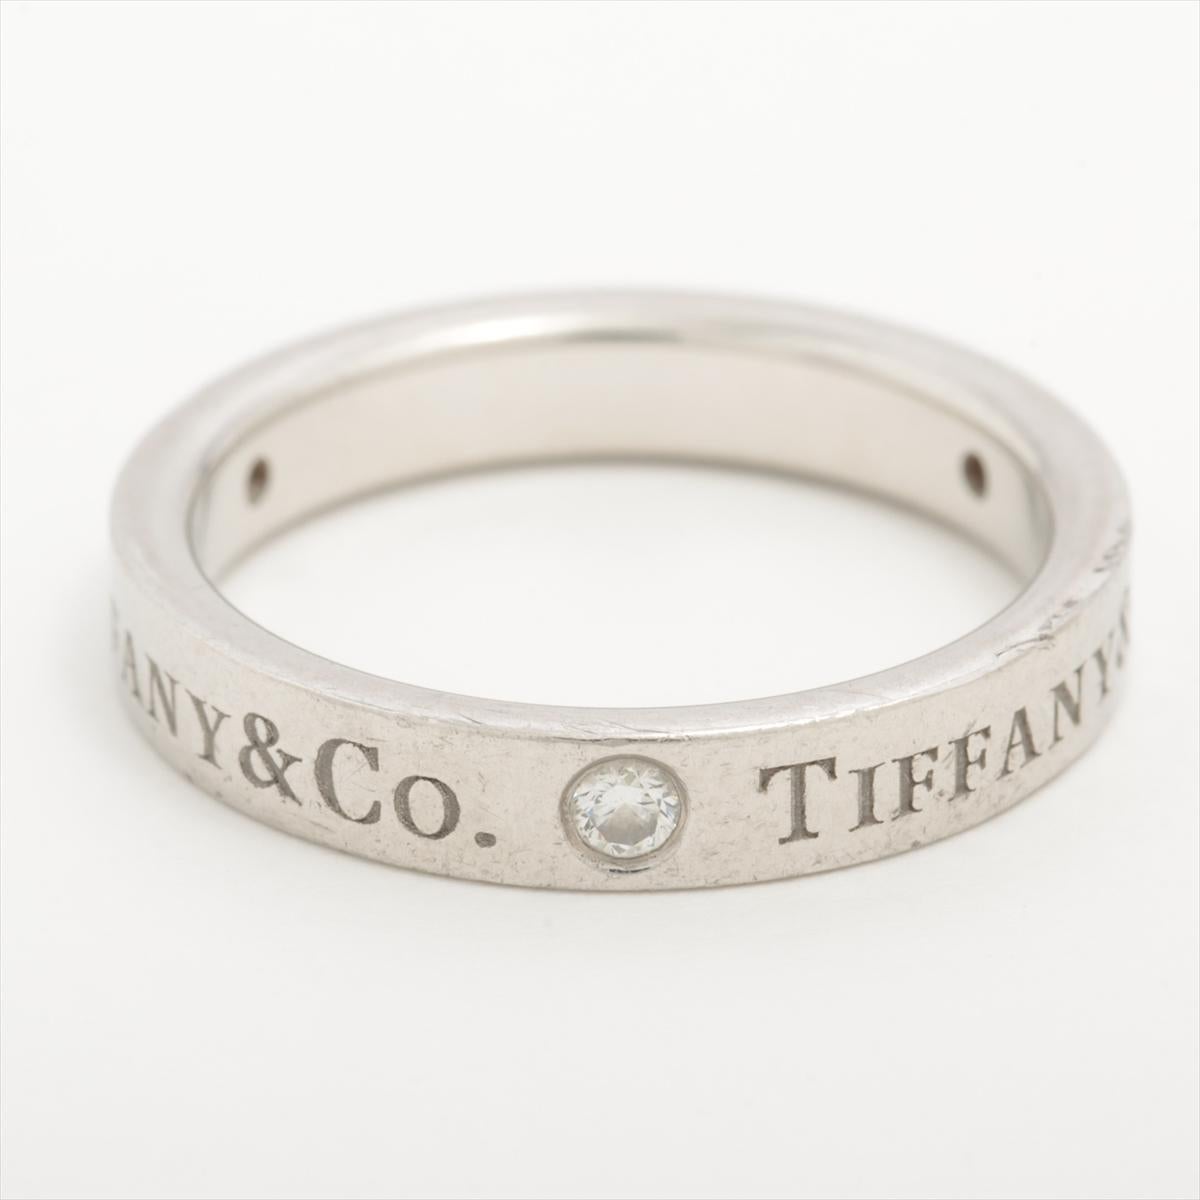 Tiffany & Co. Flaches Band Diamantring im Zustand „Gut“ im Angebot in Indianapolis, IN